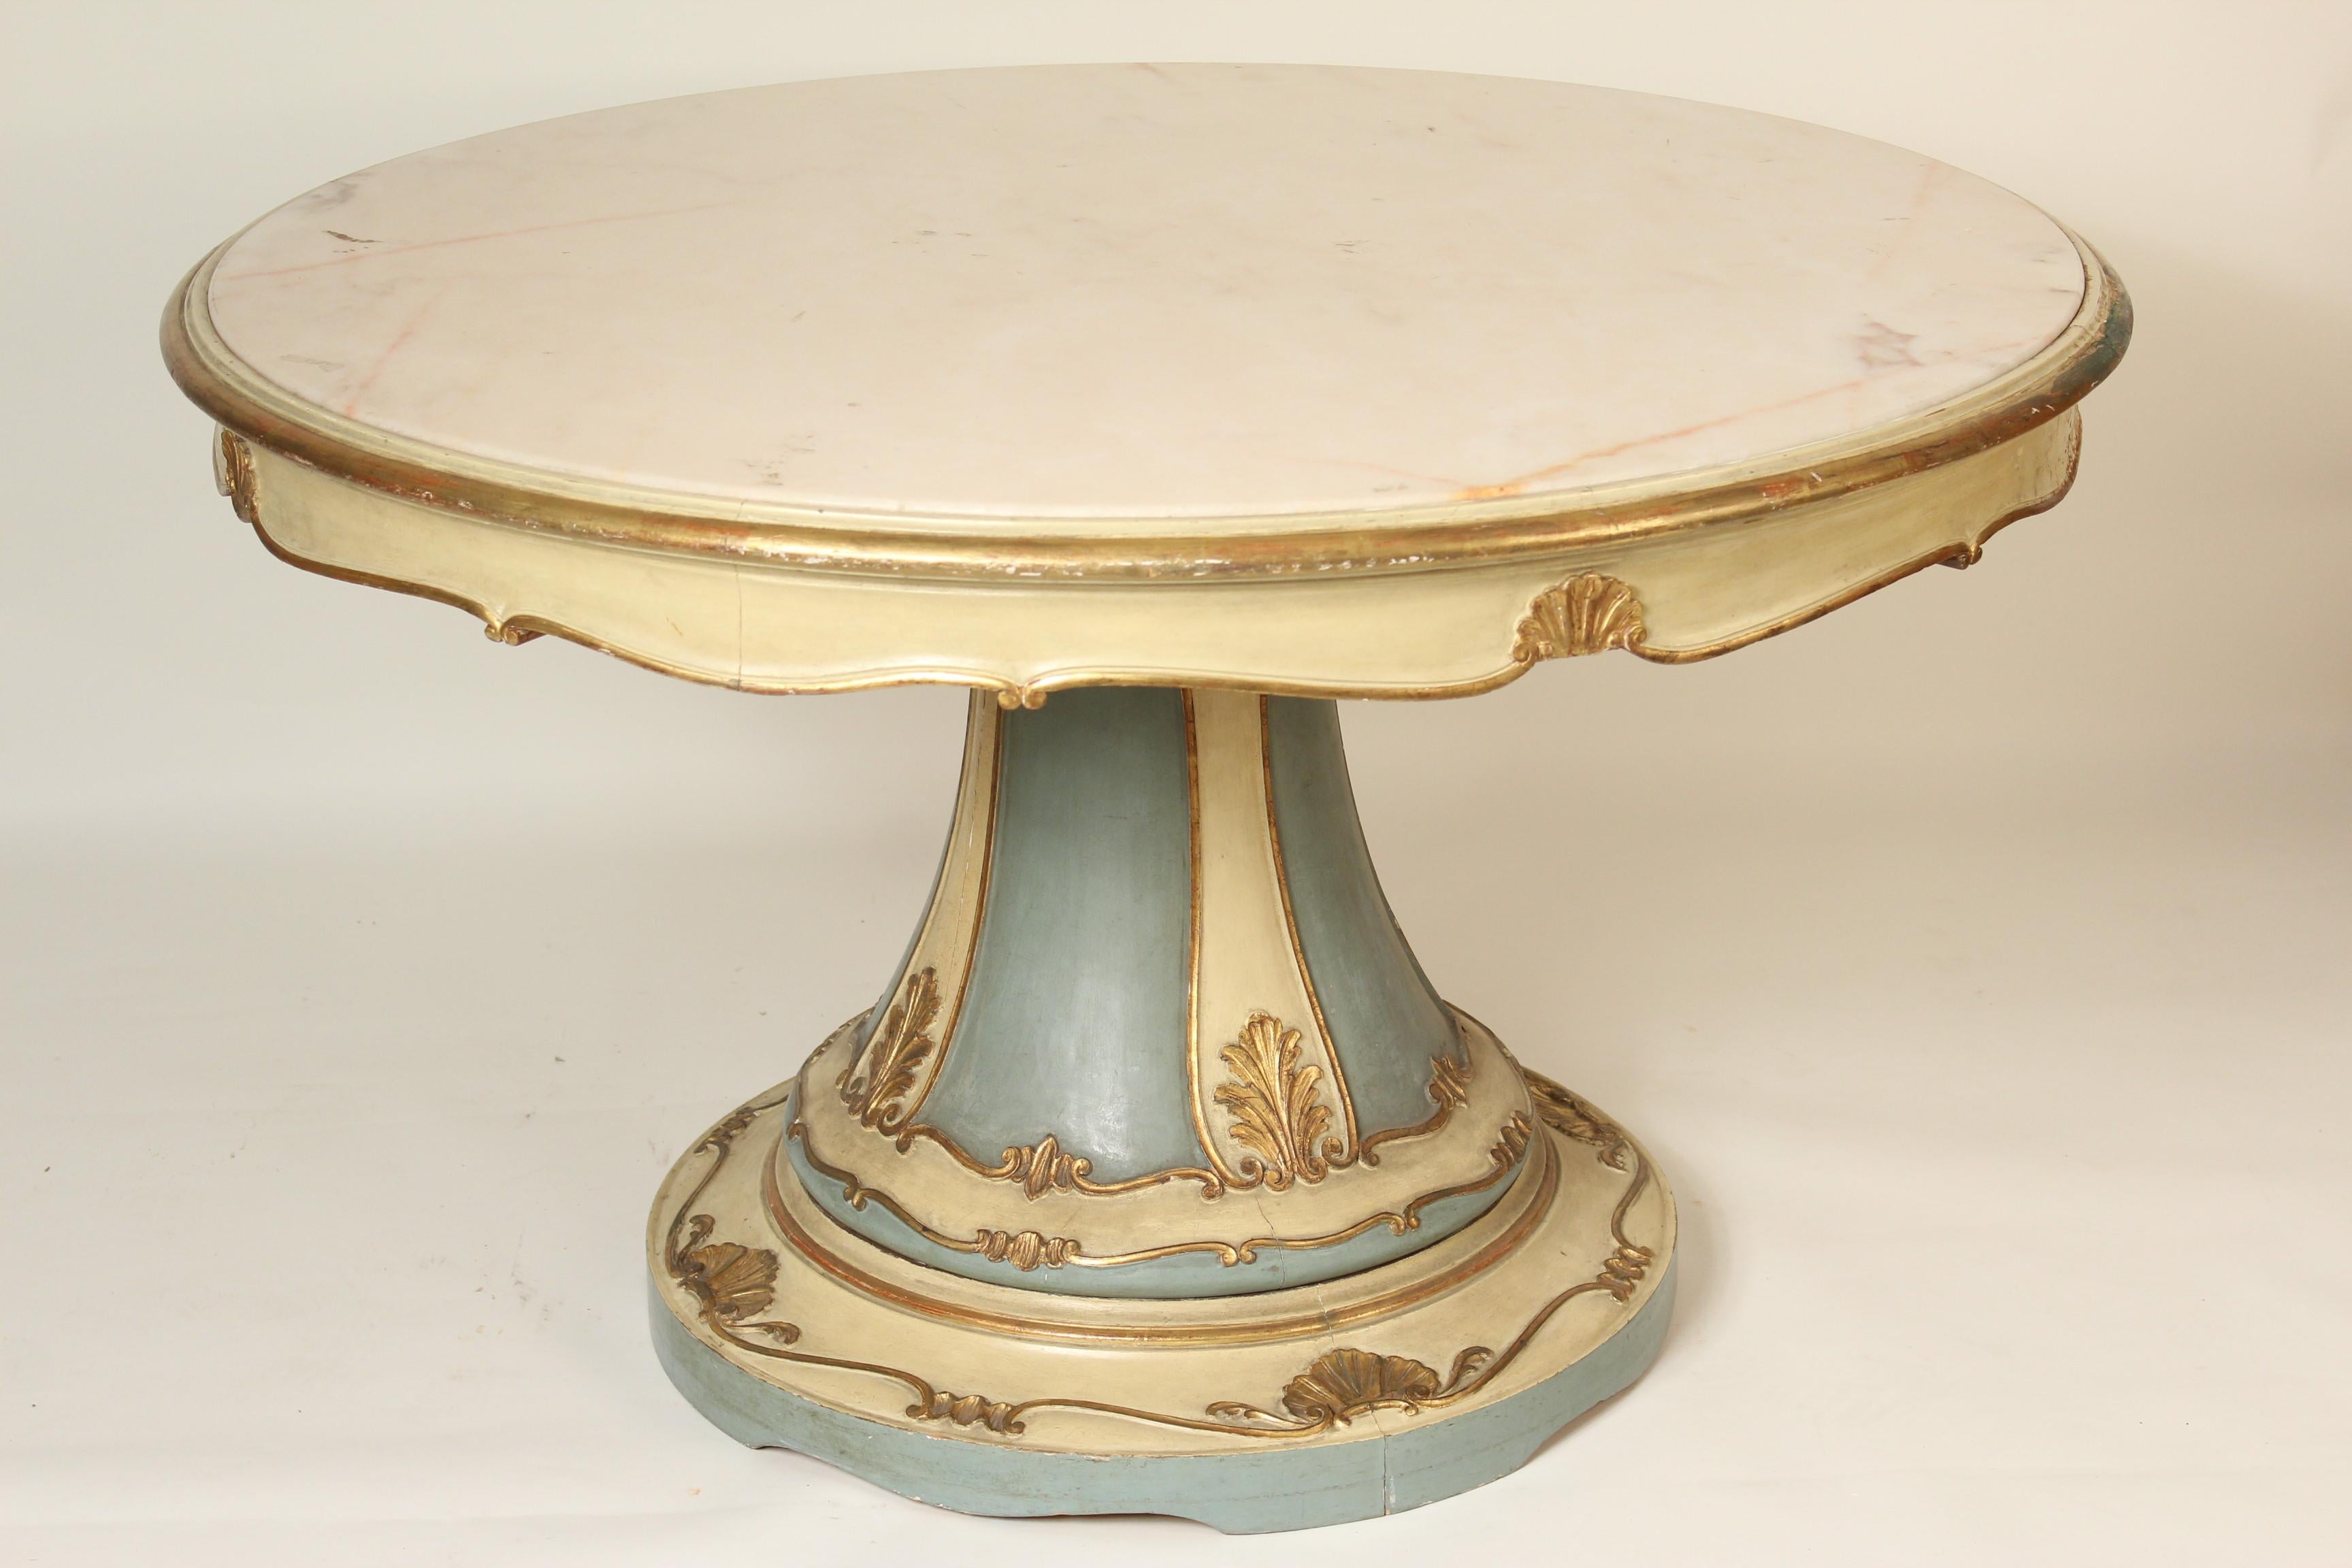 Italian Belle Époque style painted and partial gilt center table with onyx top, circa 1920s.